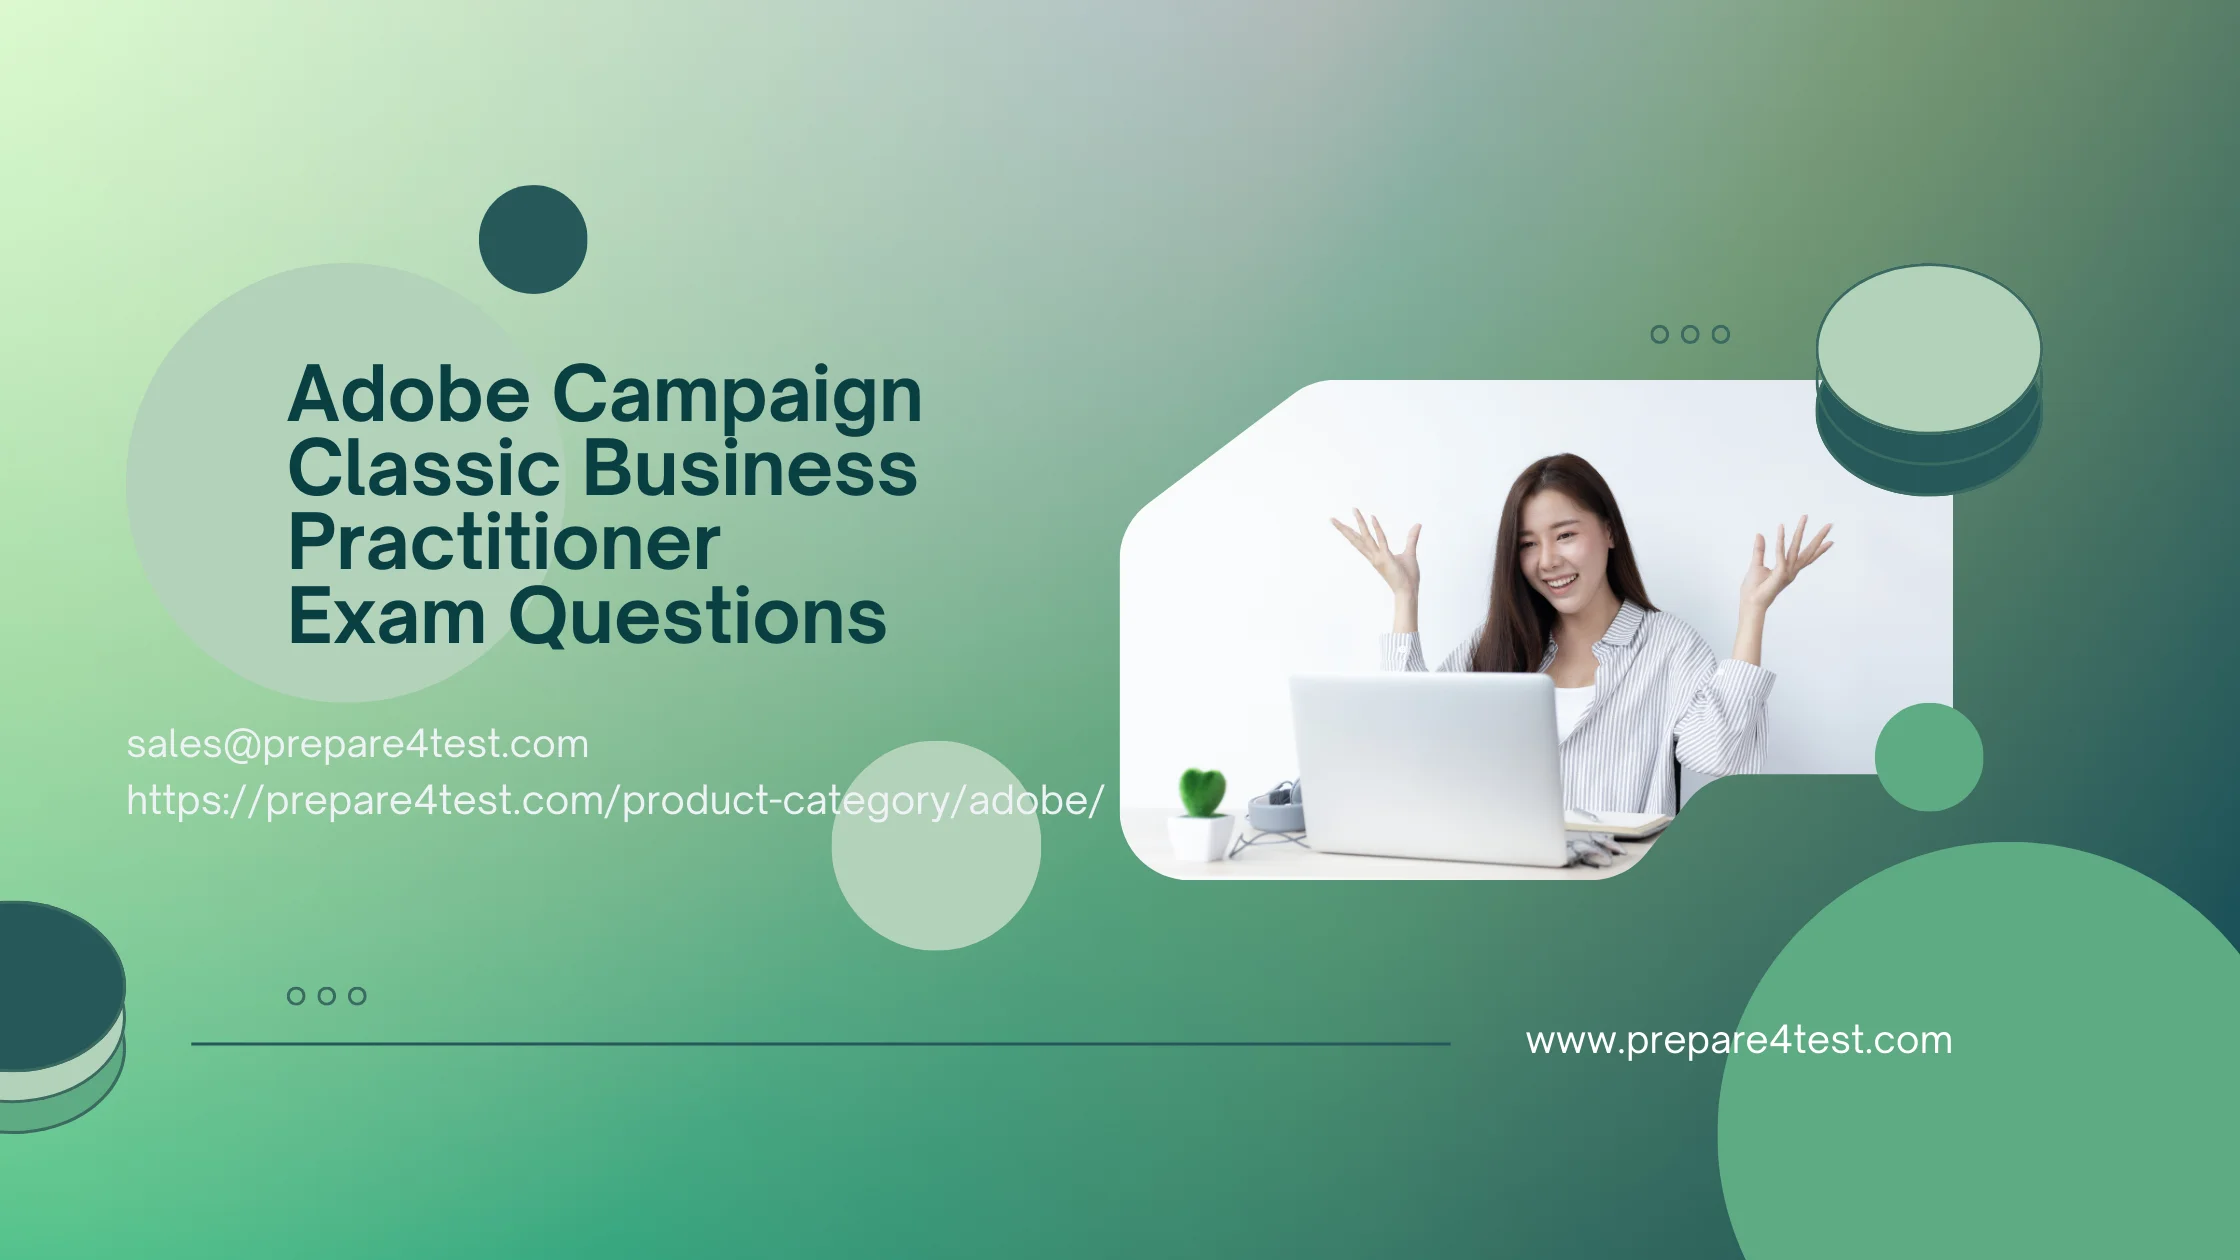 Adobe Campaign Classic Business Practitioner Exam Questions success